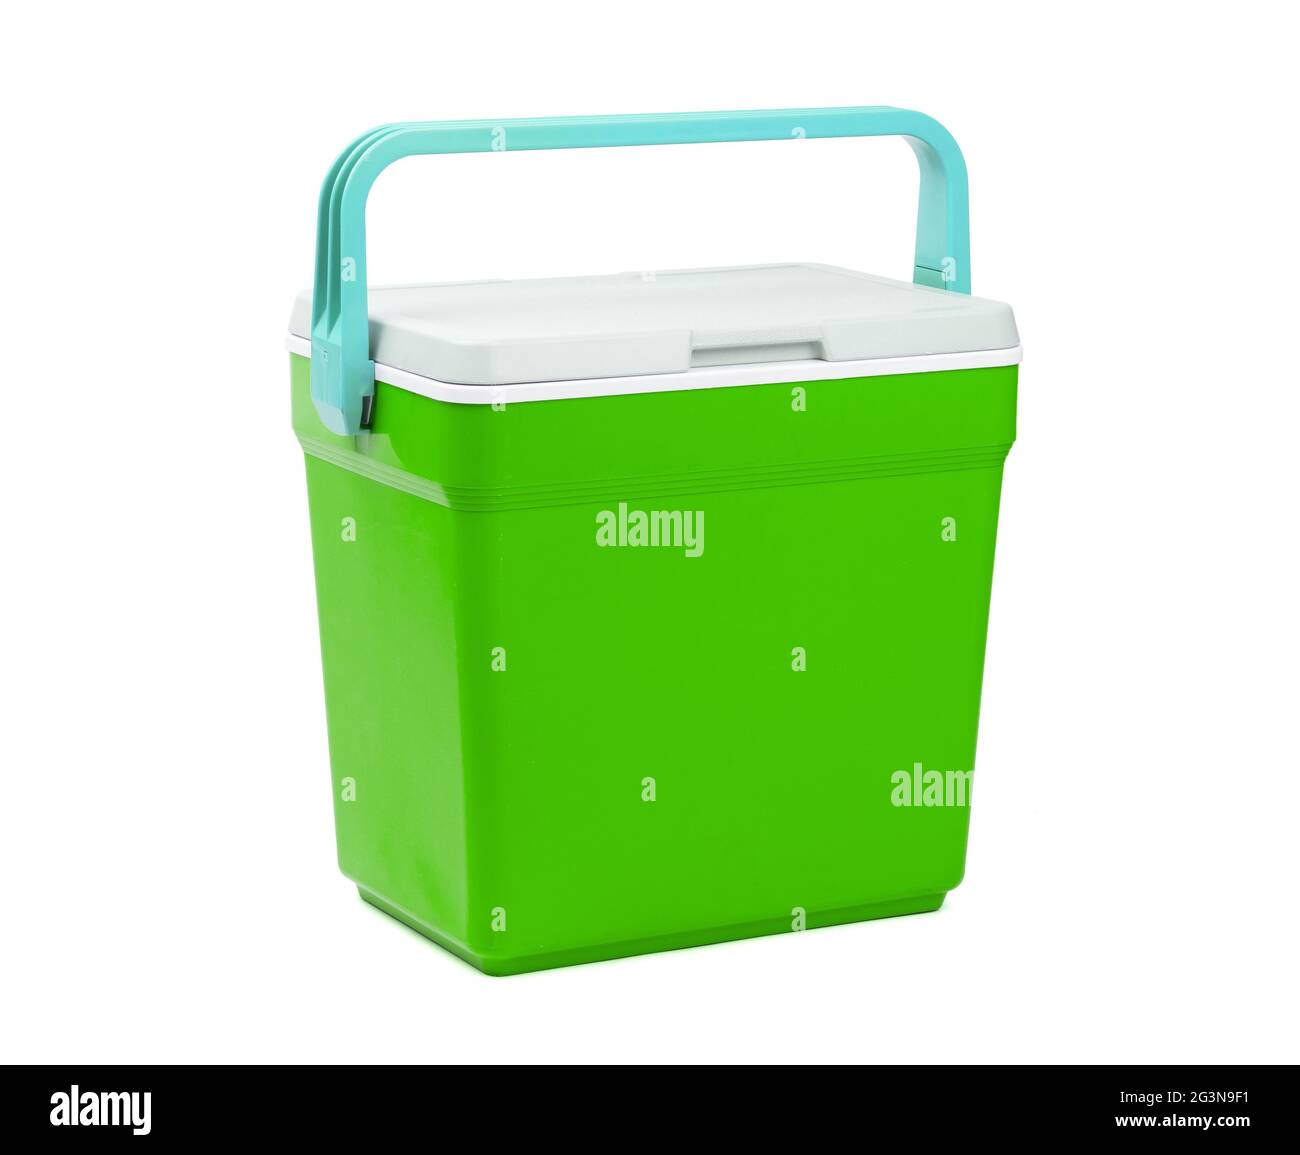 Cooler box isolated Stock Photo